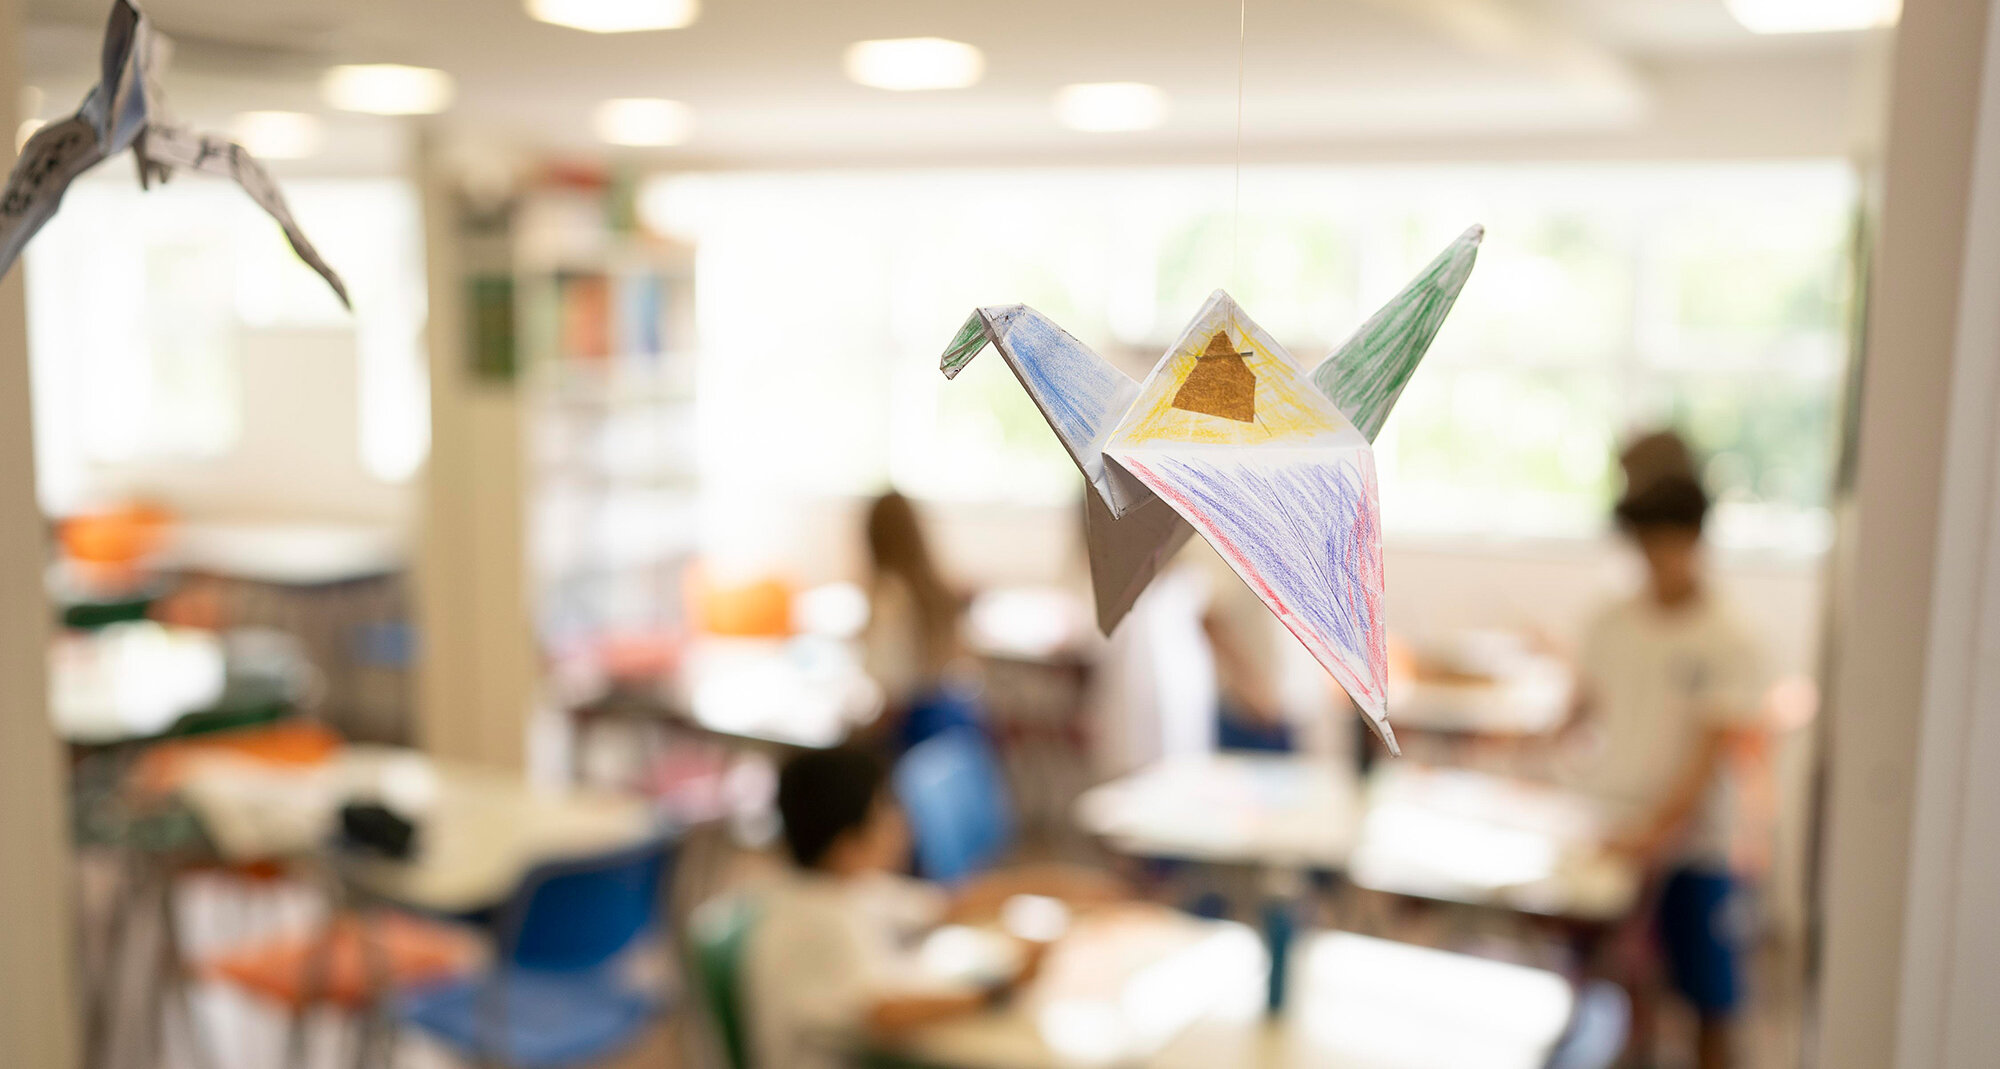 A handmade, painted origami crane hangs in the classroom, which fades into the background.	